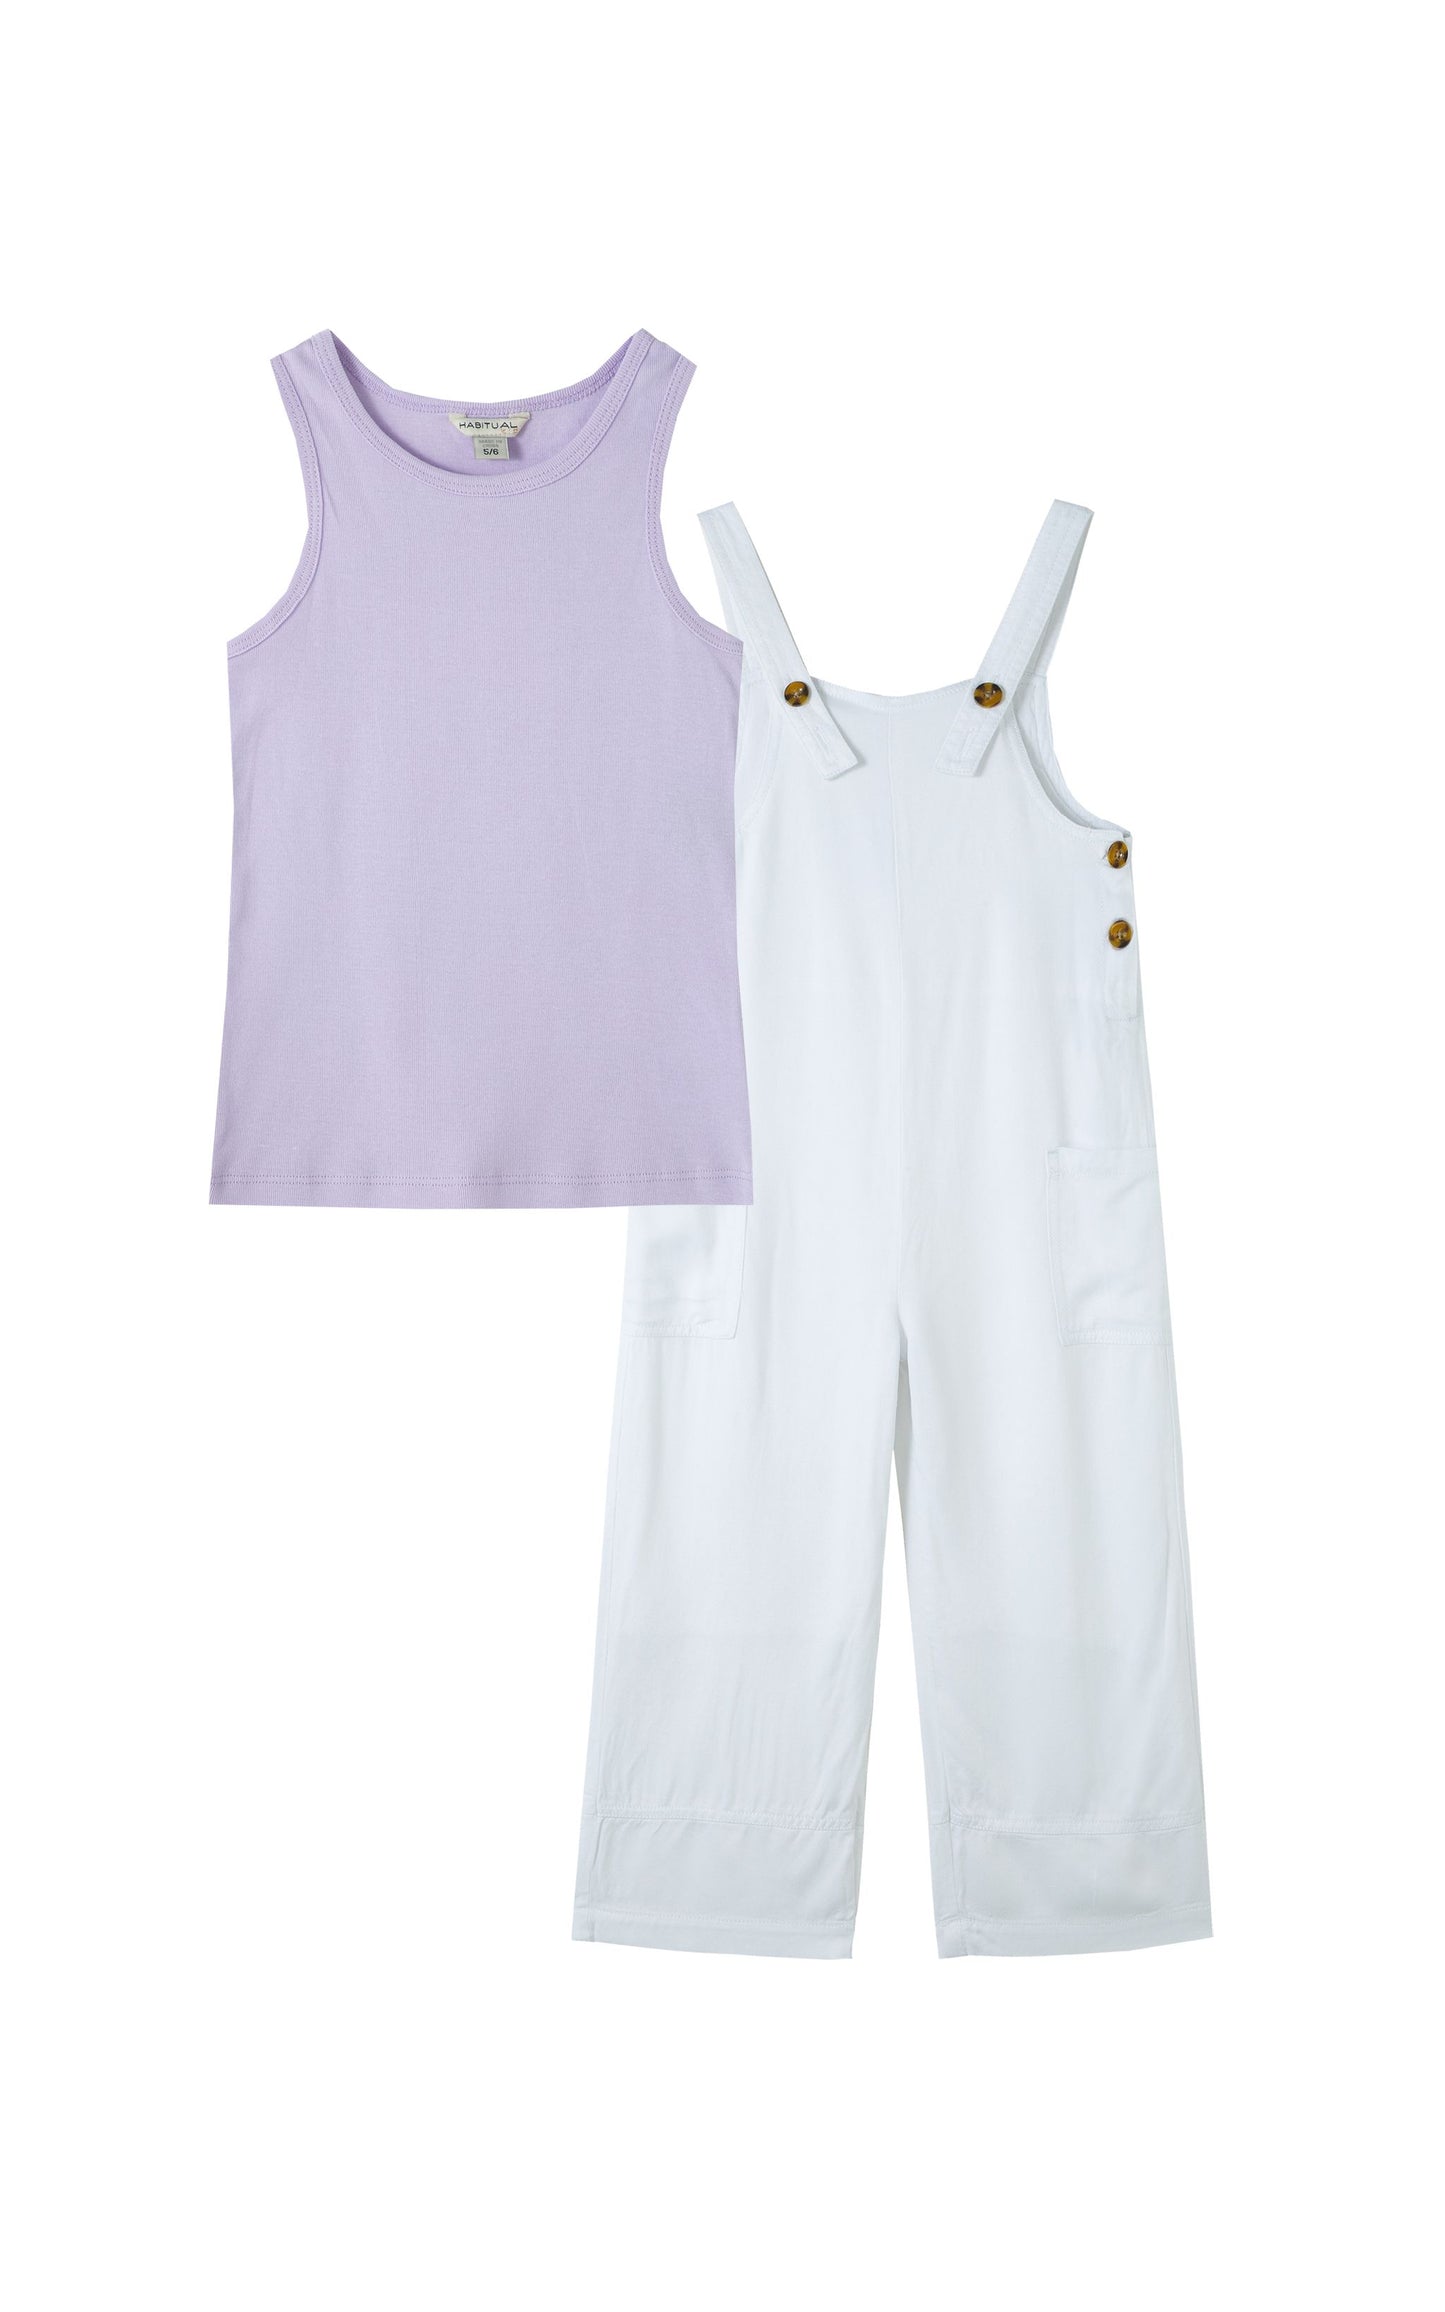 Wide Leg Overall Set--White and Lilac